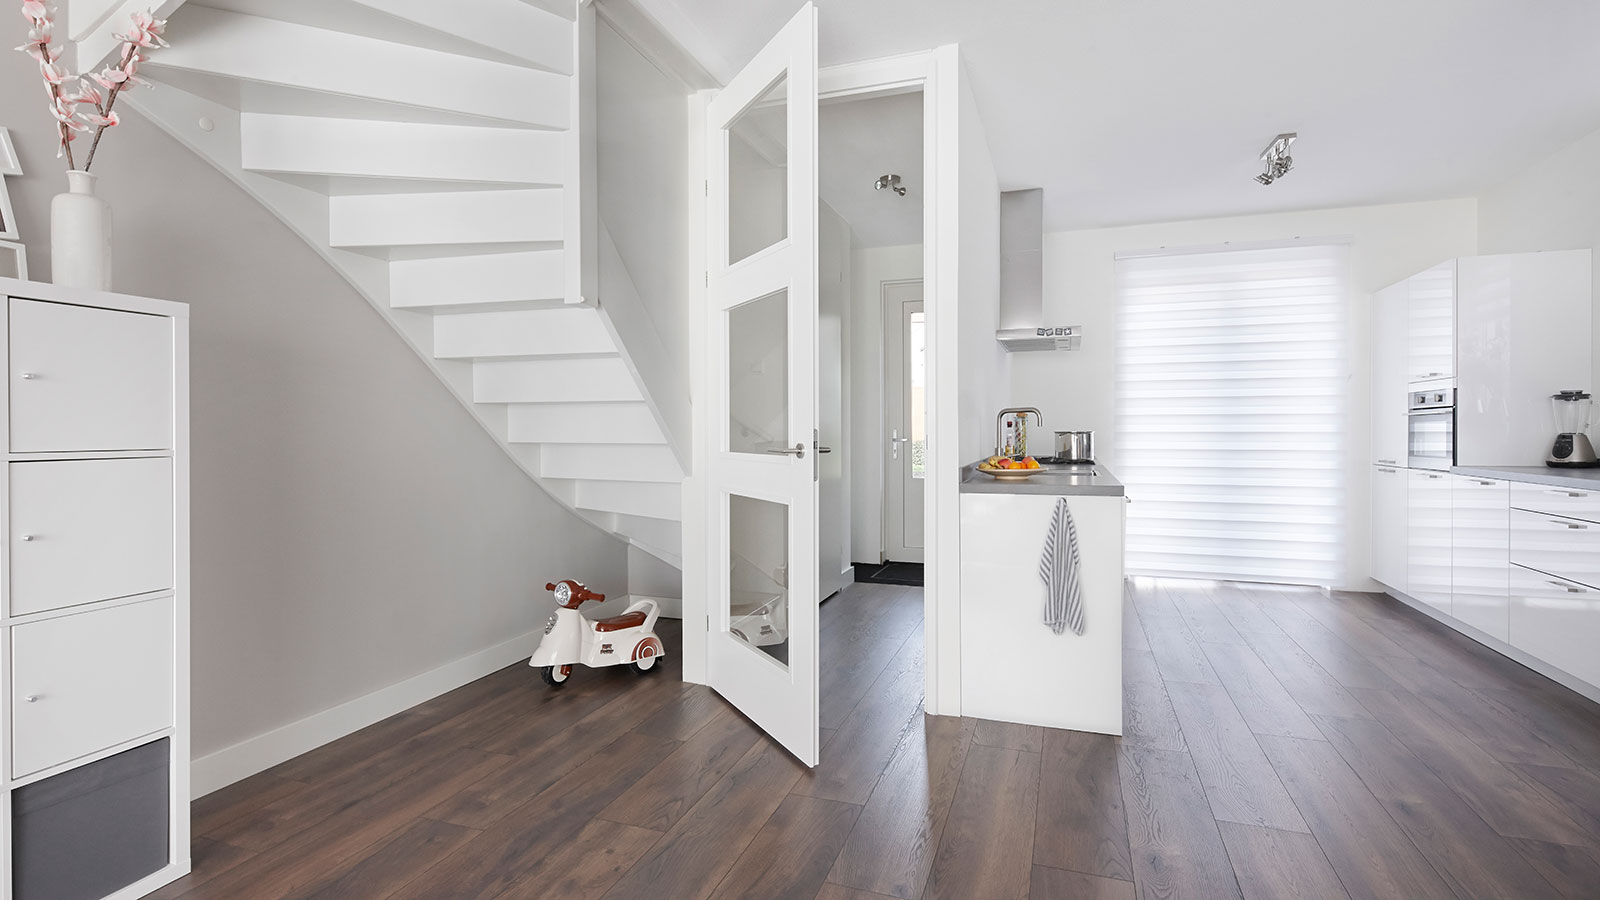 The overall concept must be harmonious and the design of the doors is also very important. Doors enrich the comfort, functionality and atmosphere of rooms.